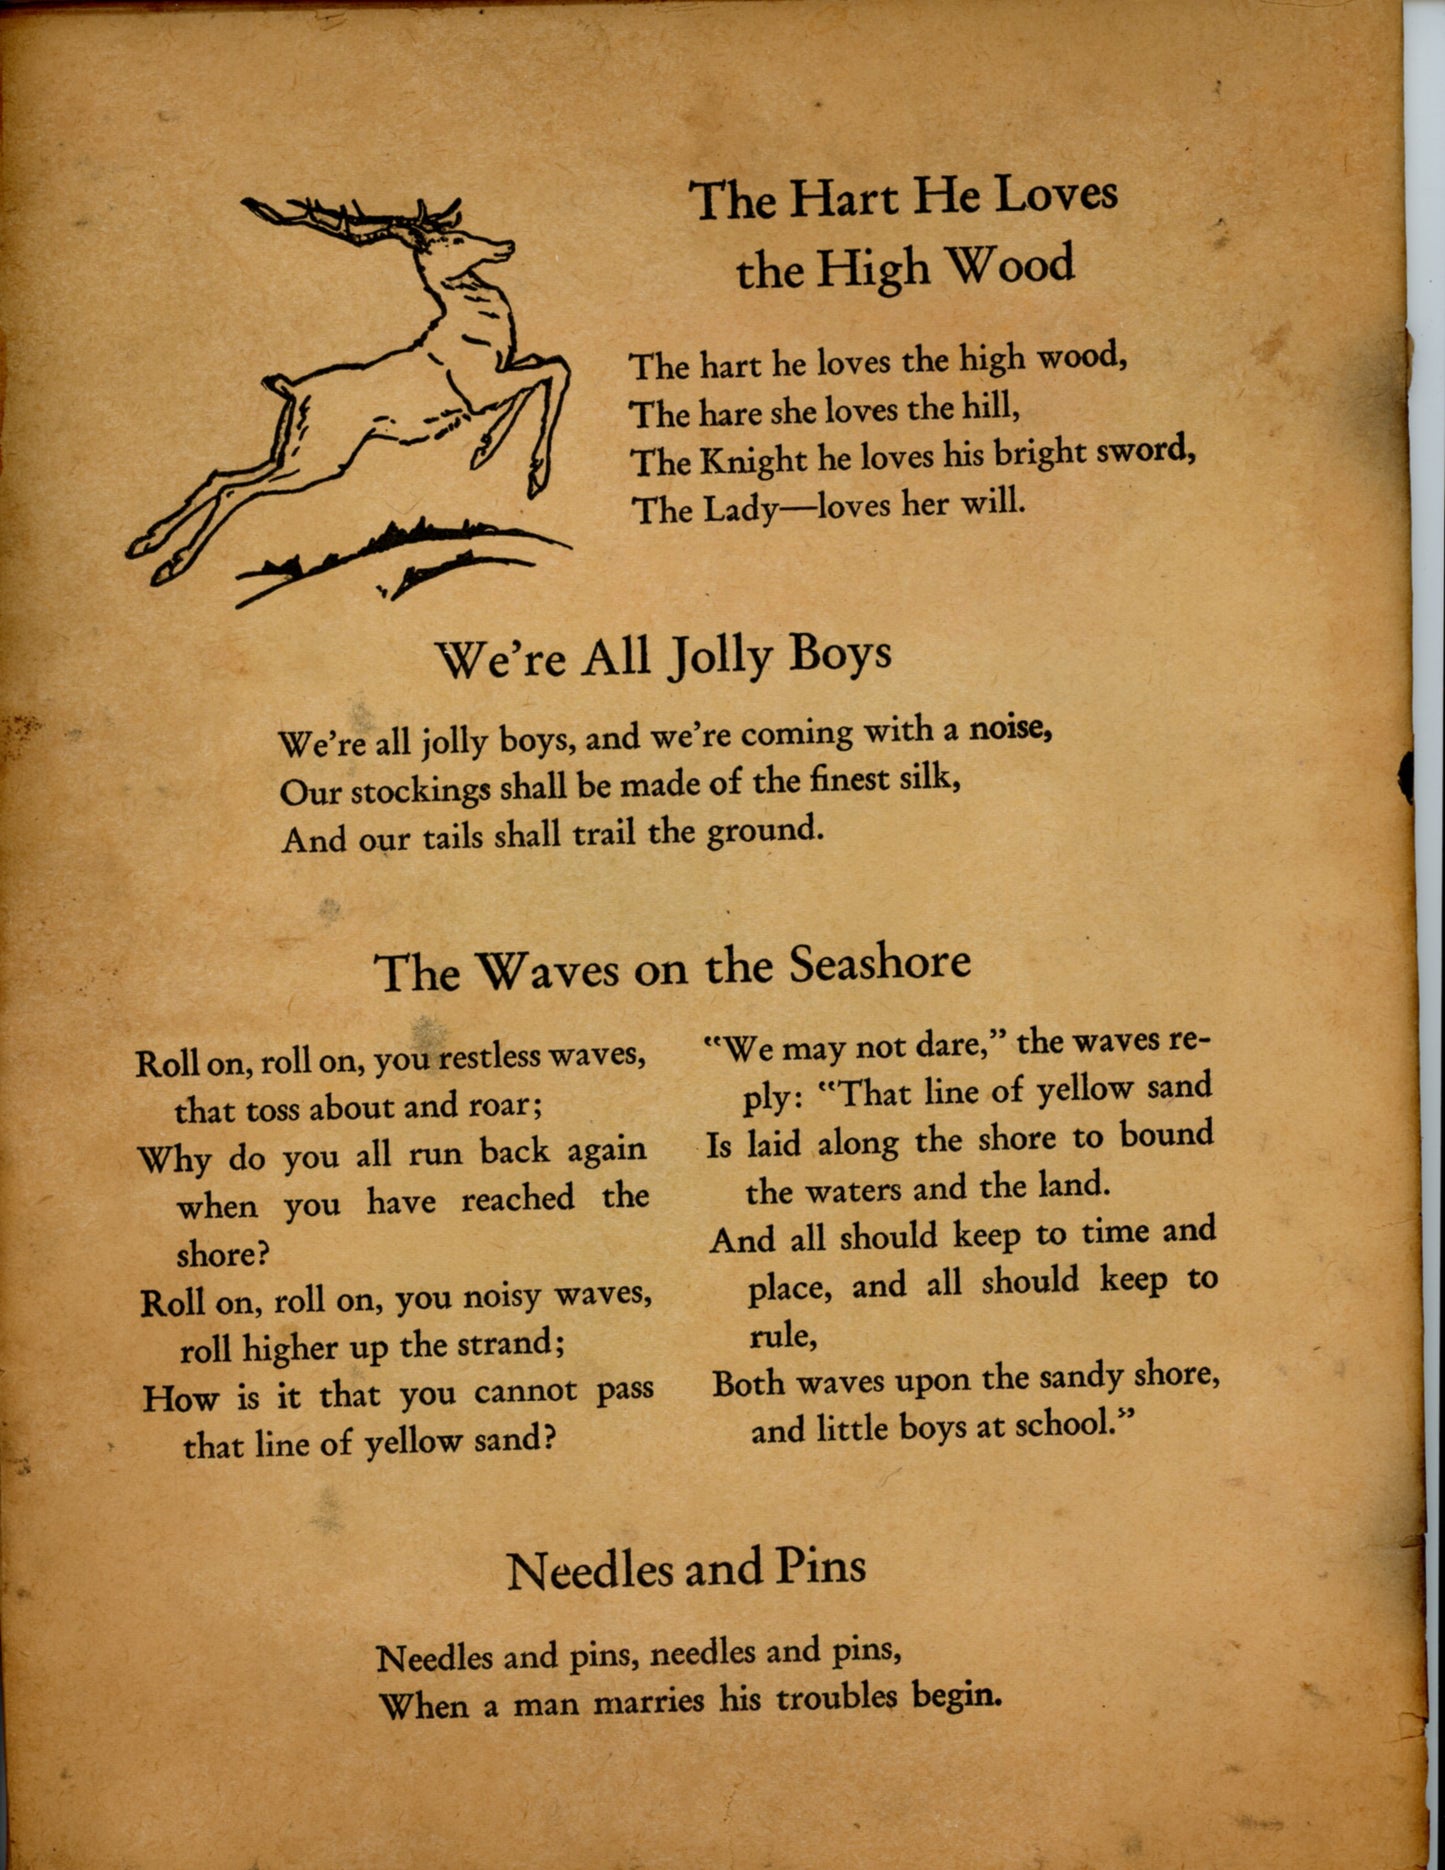 Very Old Copy Whitman Publishing MOTHER GOOSE RHYMES Circa 1922